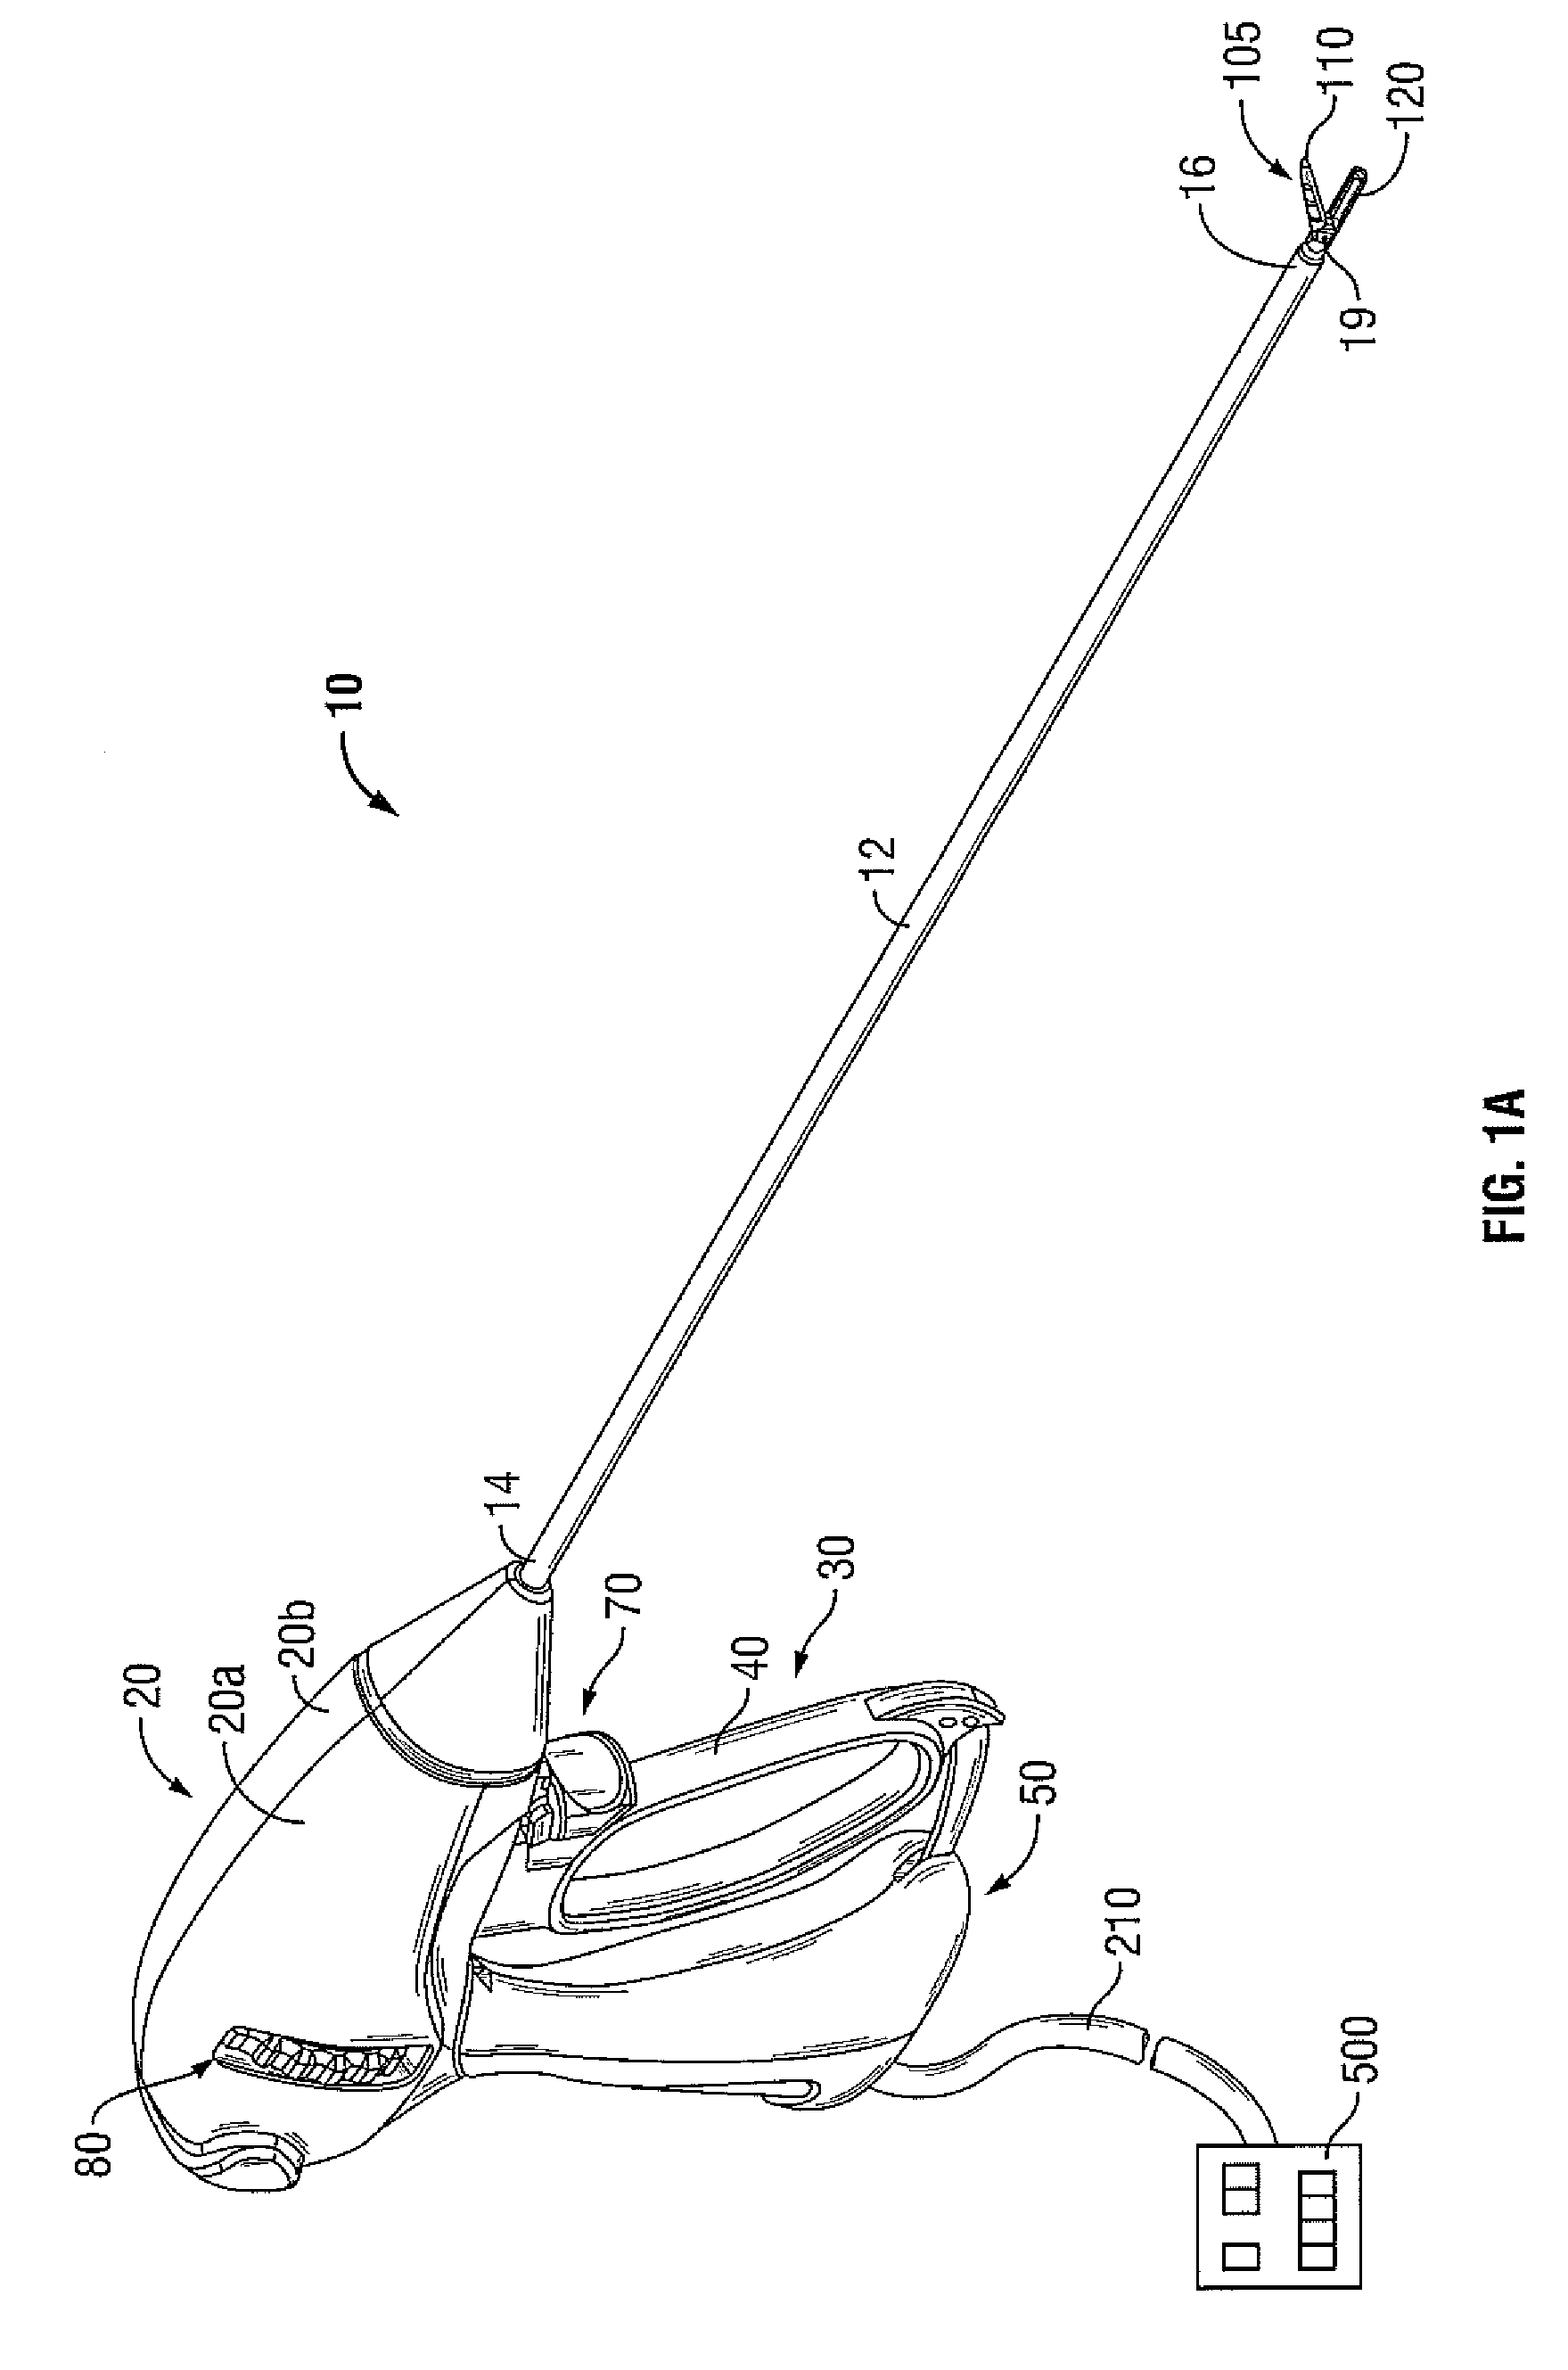 Ultrasound Device for Precise Tissue Sealing and Blade-Less Cutting